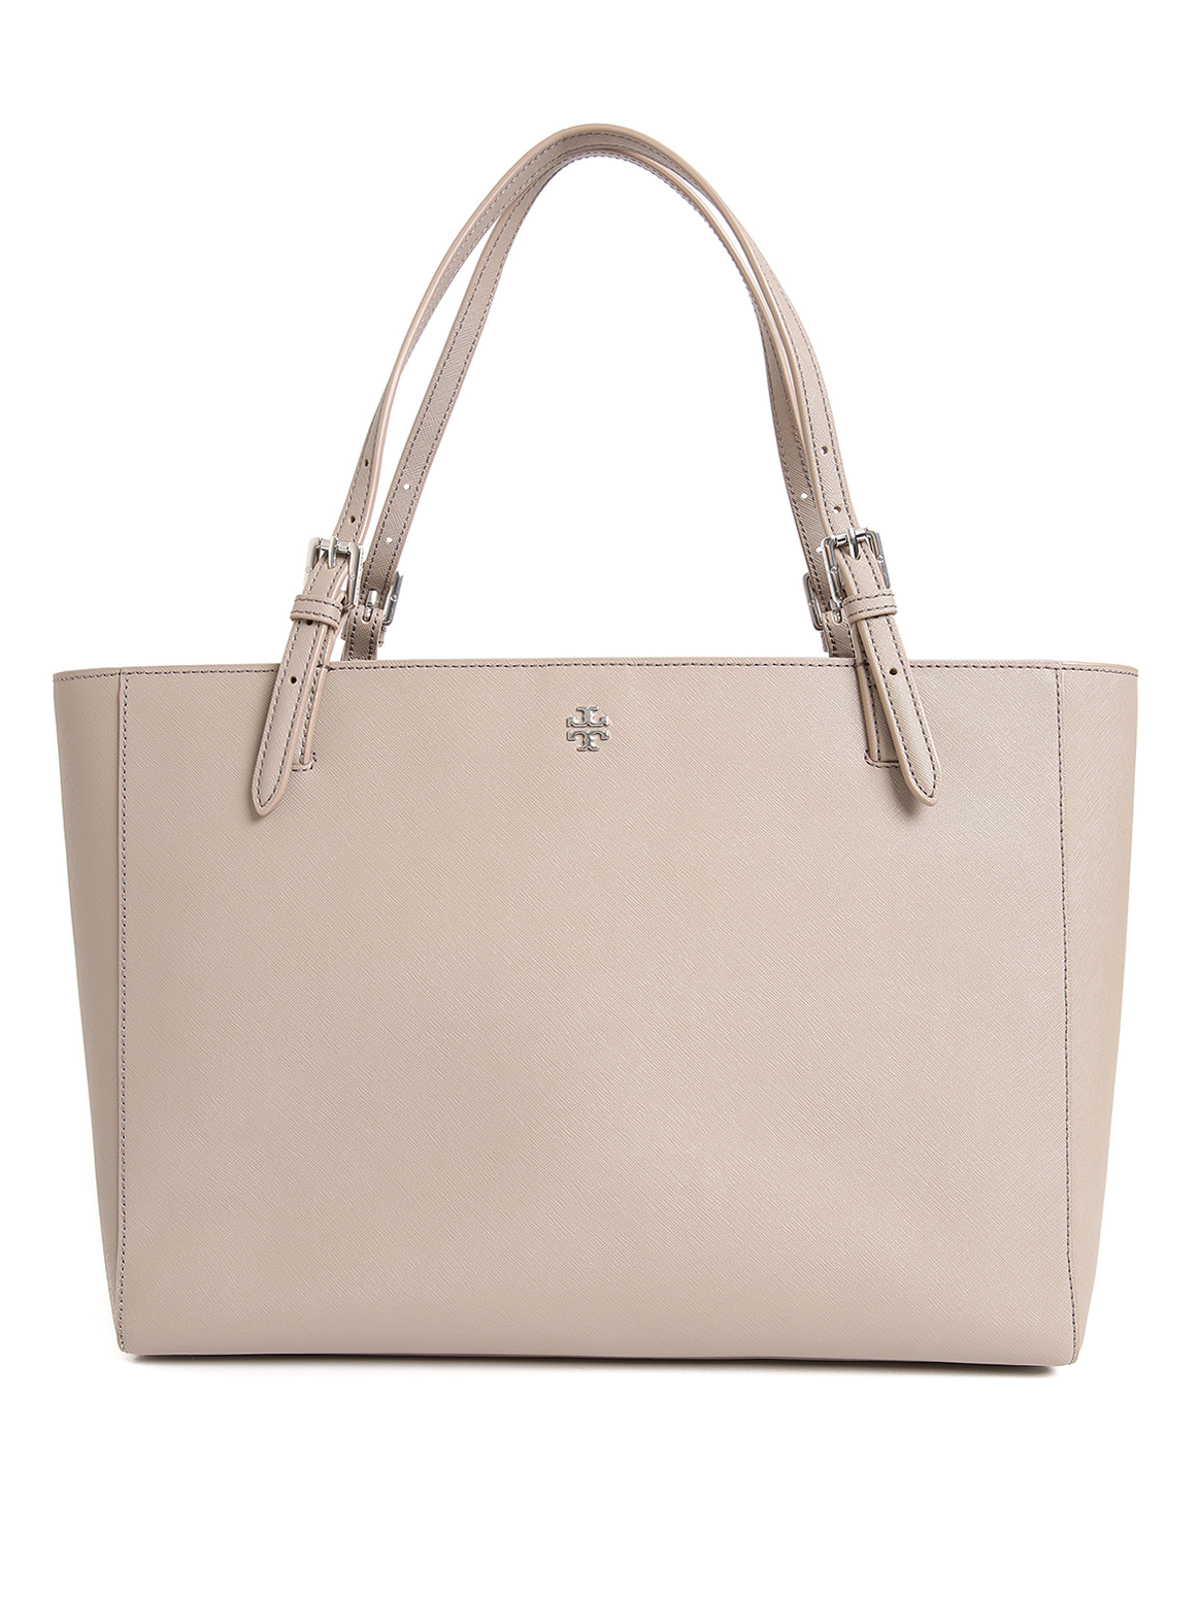 Tory Burch, Bags, Tory Burch Saffiano Leather Tote Bag